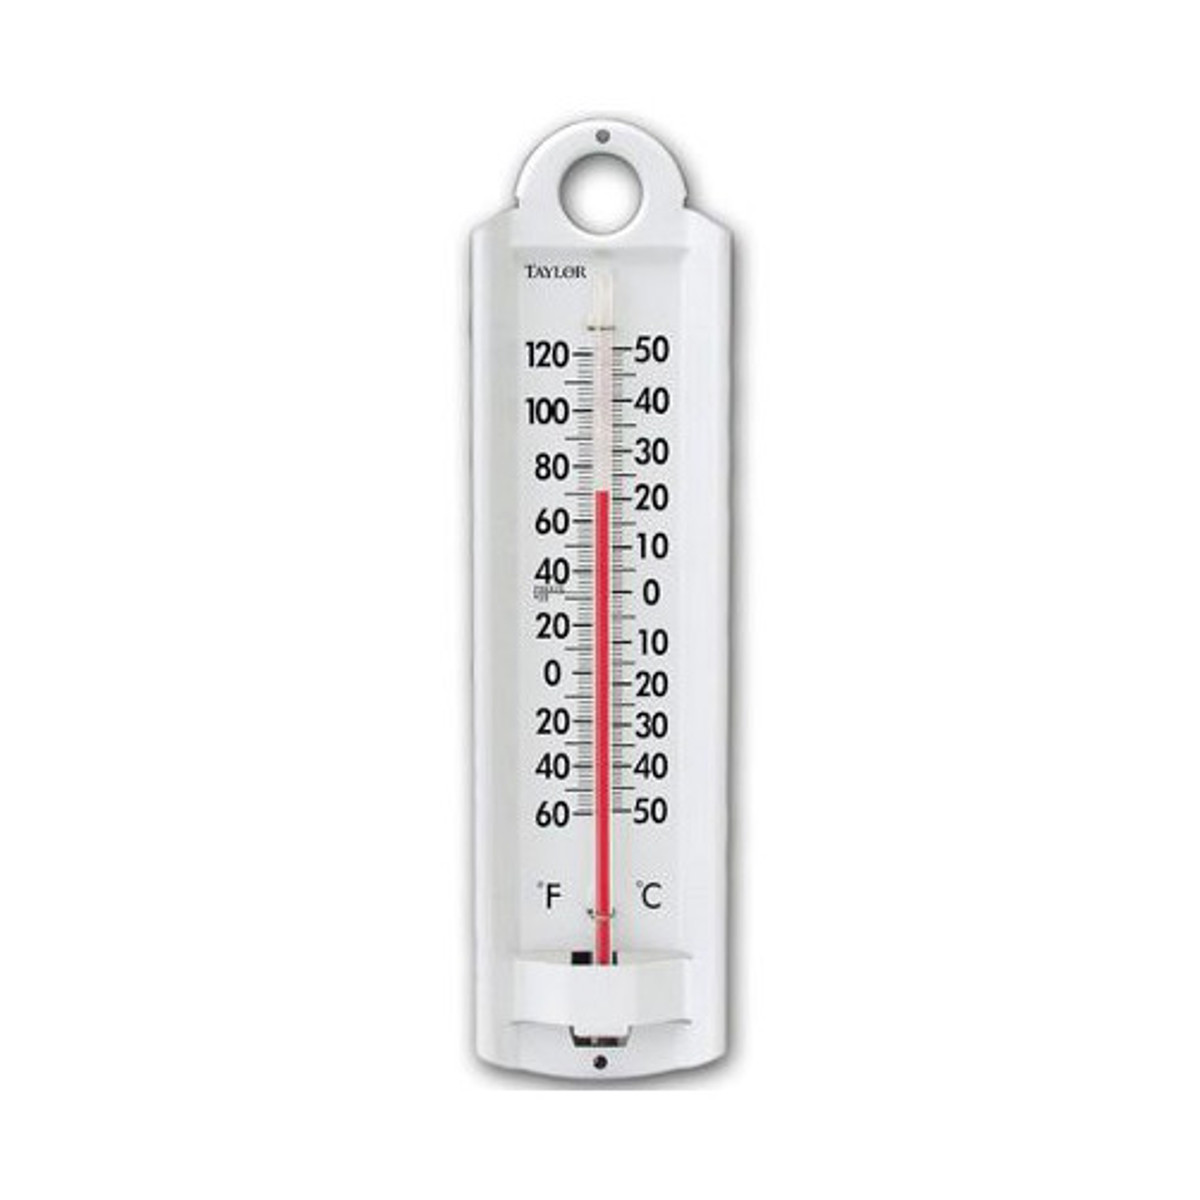 Taylor Indoor/Outdoor Thermometer/Hygrometer, 9-In.